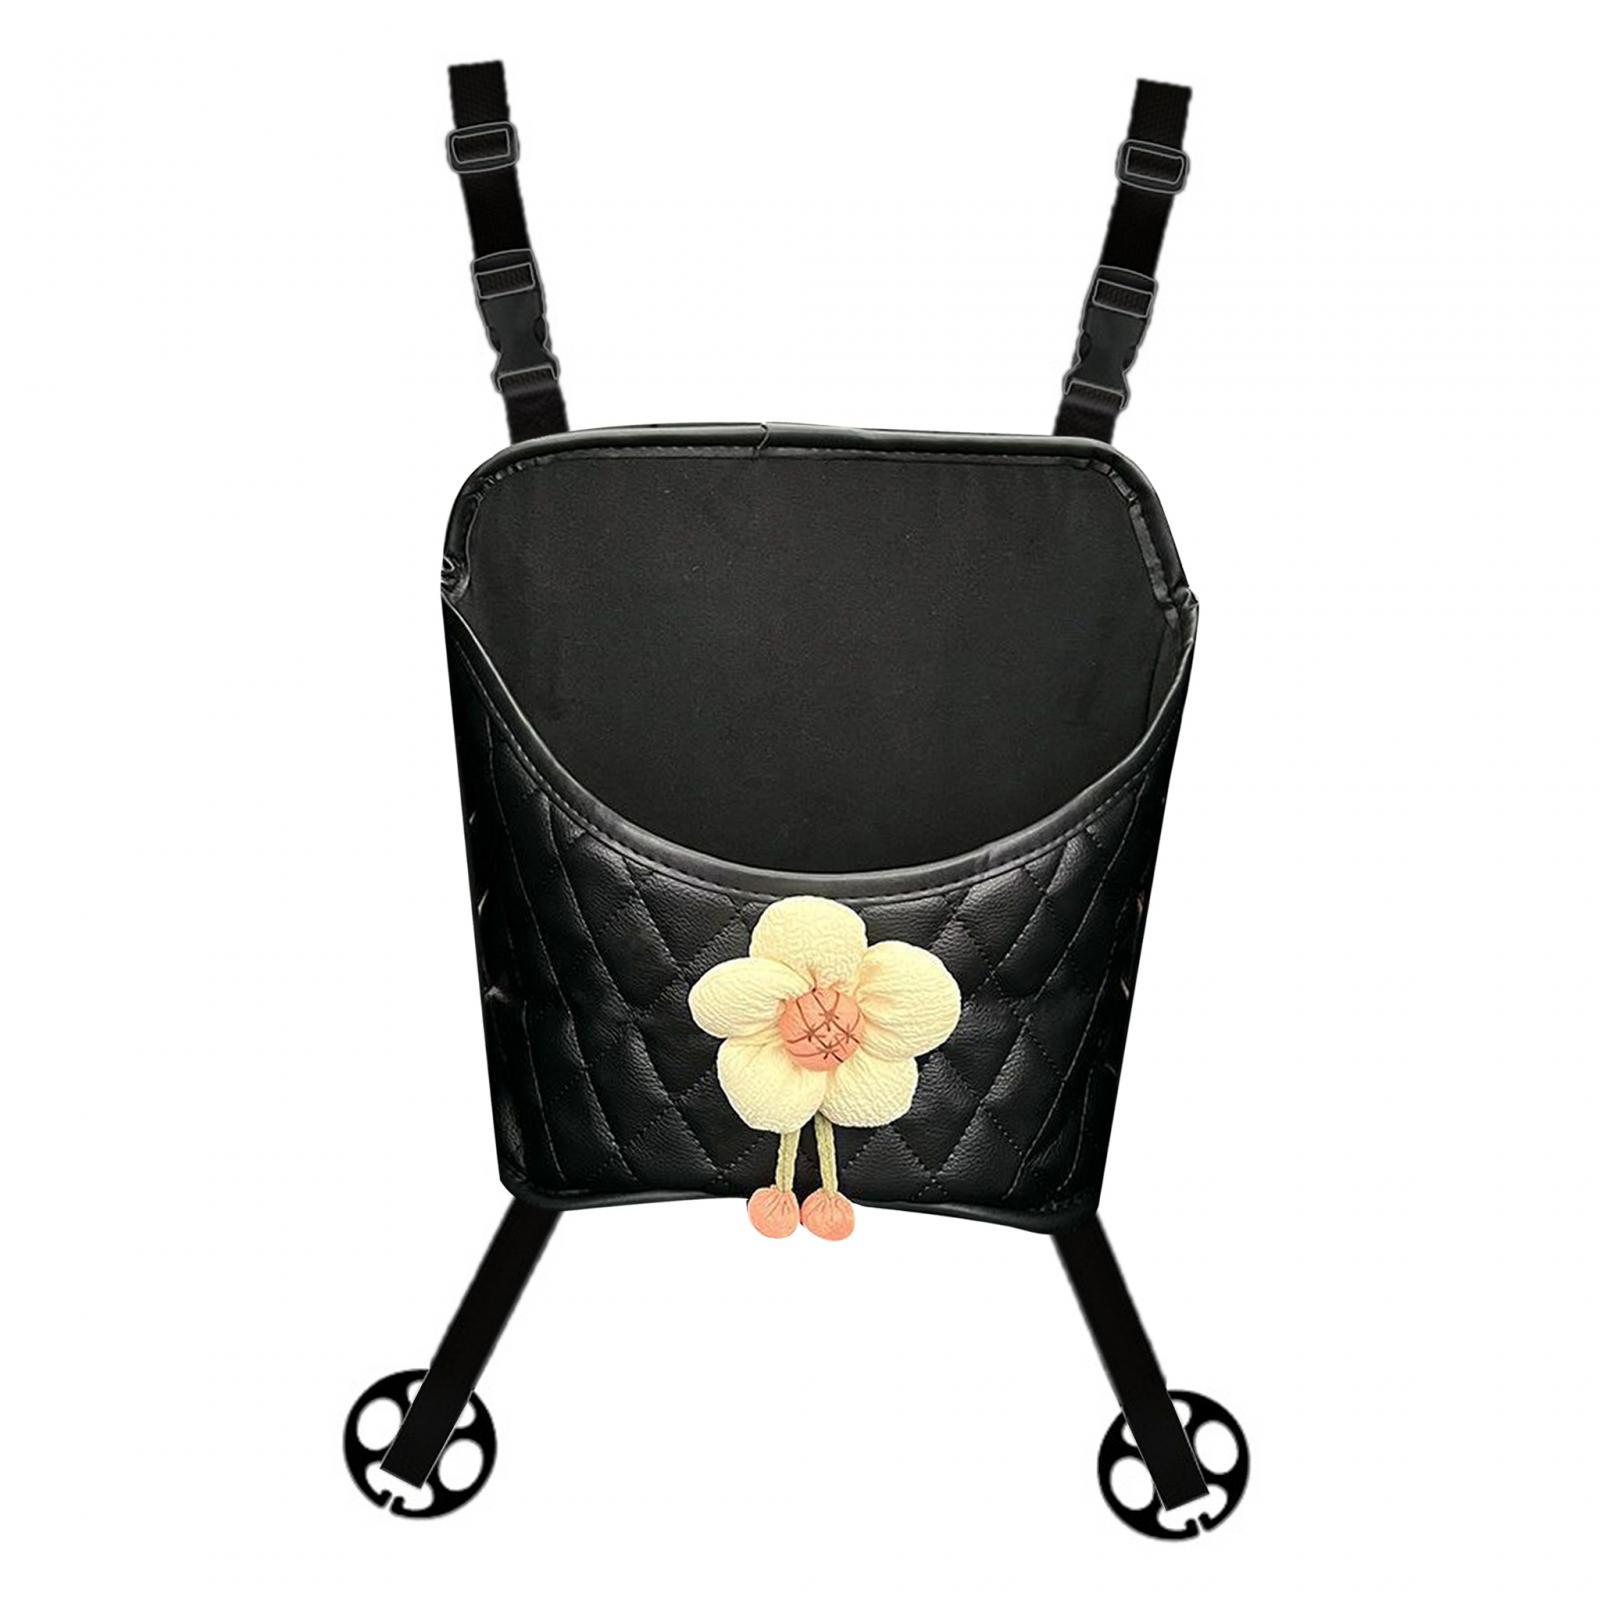 Auto Organizer Large Capacity Car Purse Holder for Cup Cosmetic Sundries black flower